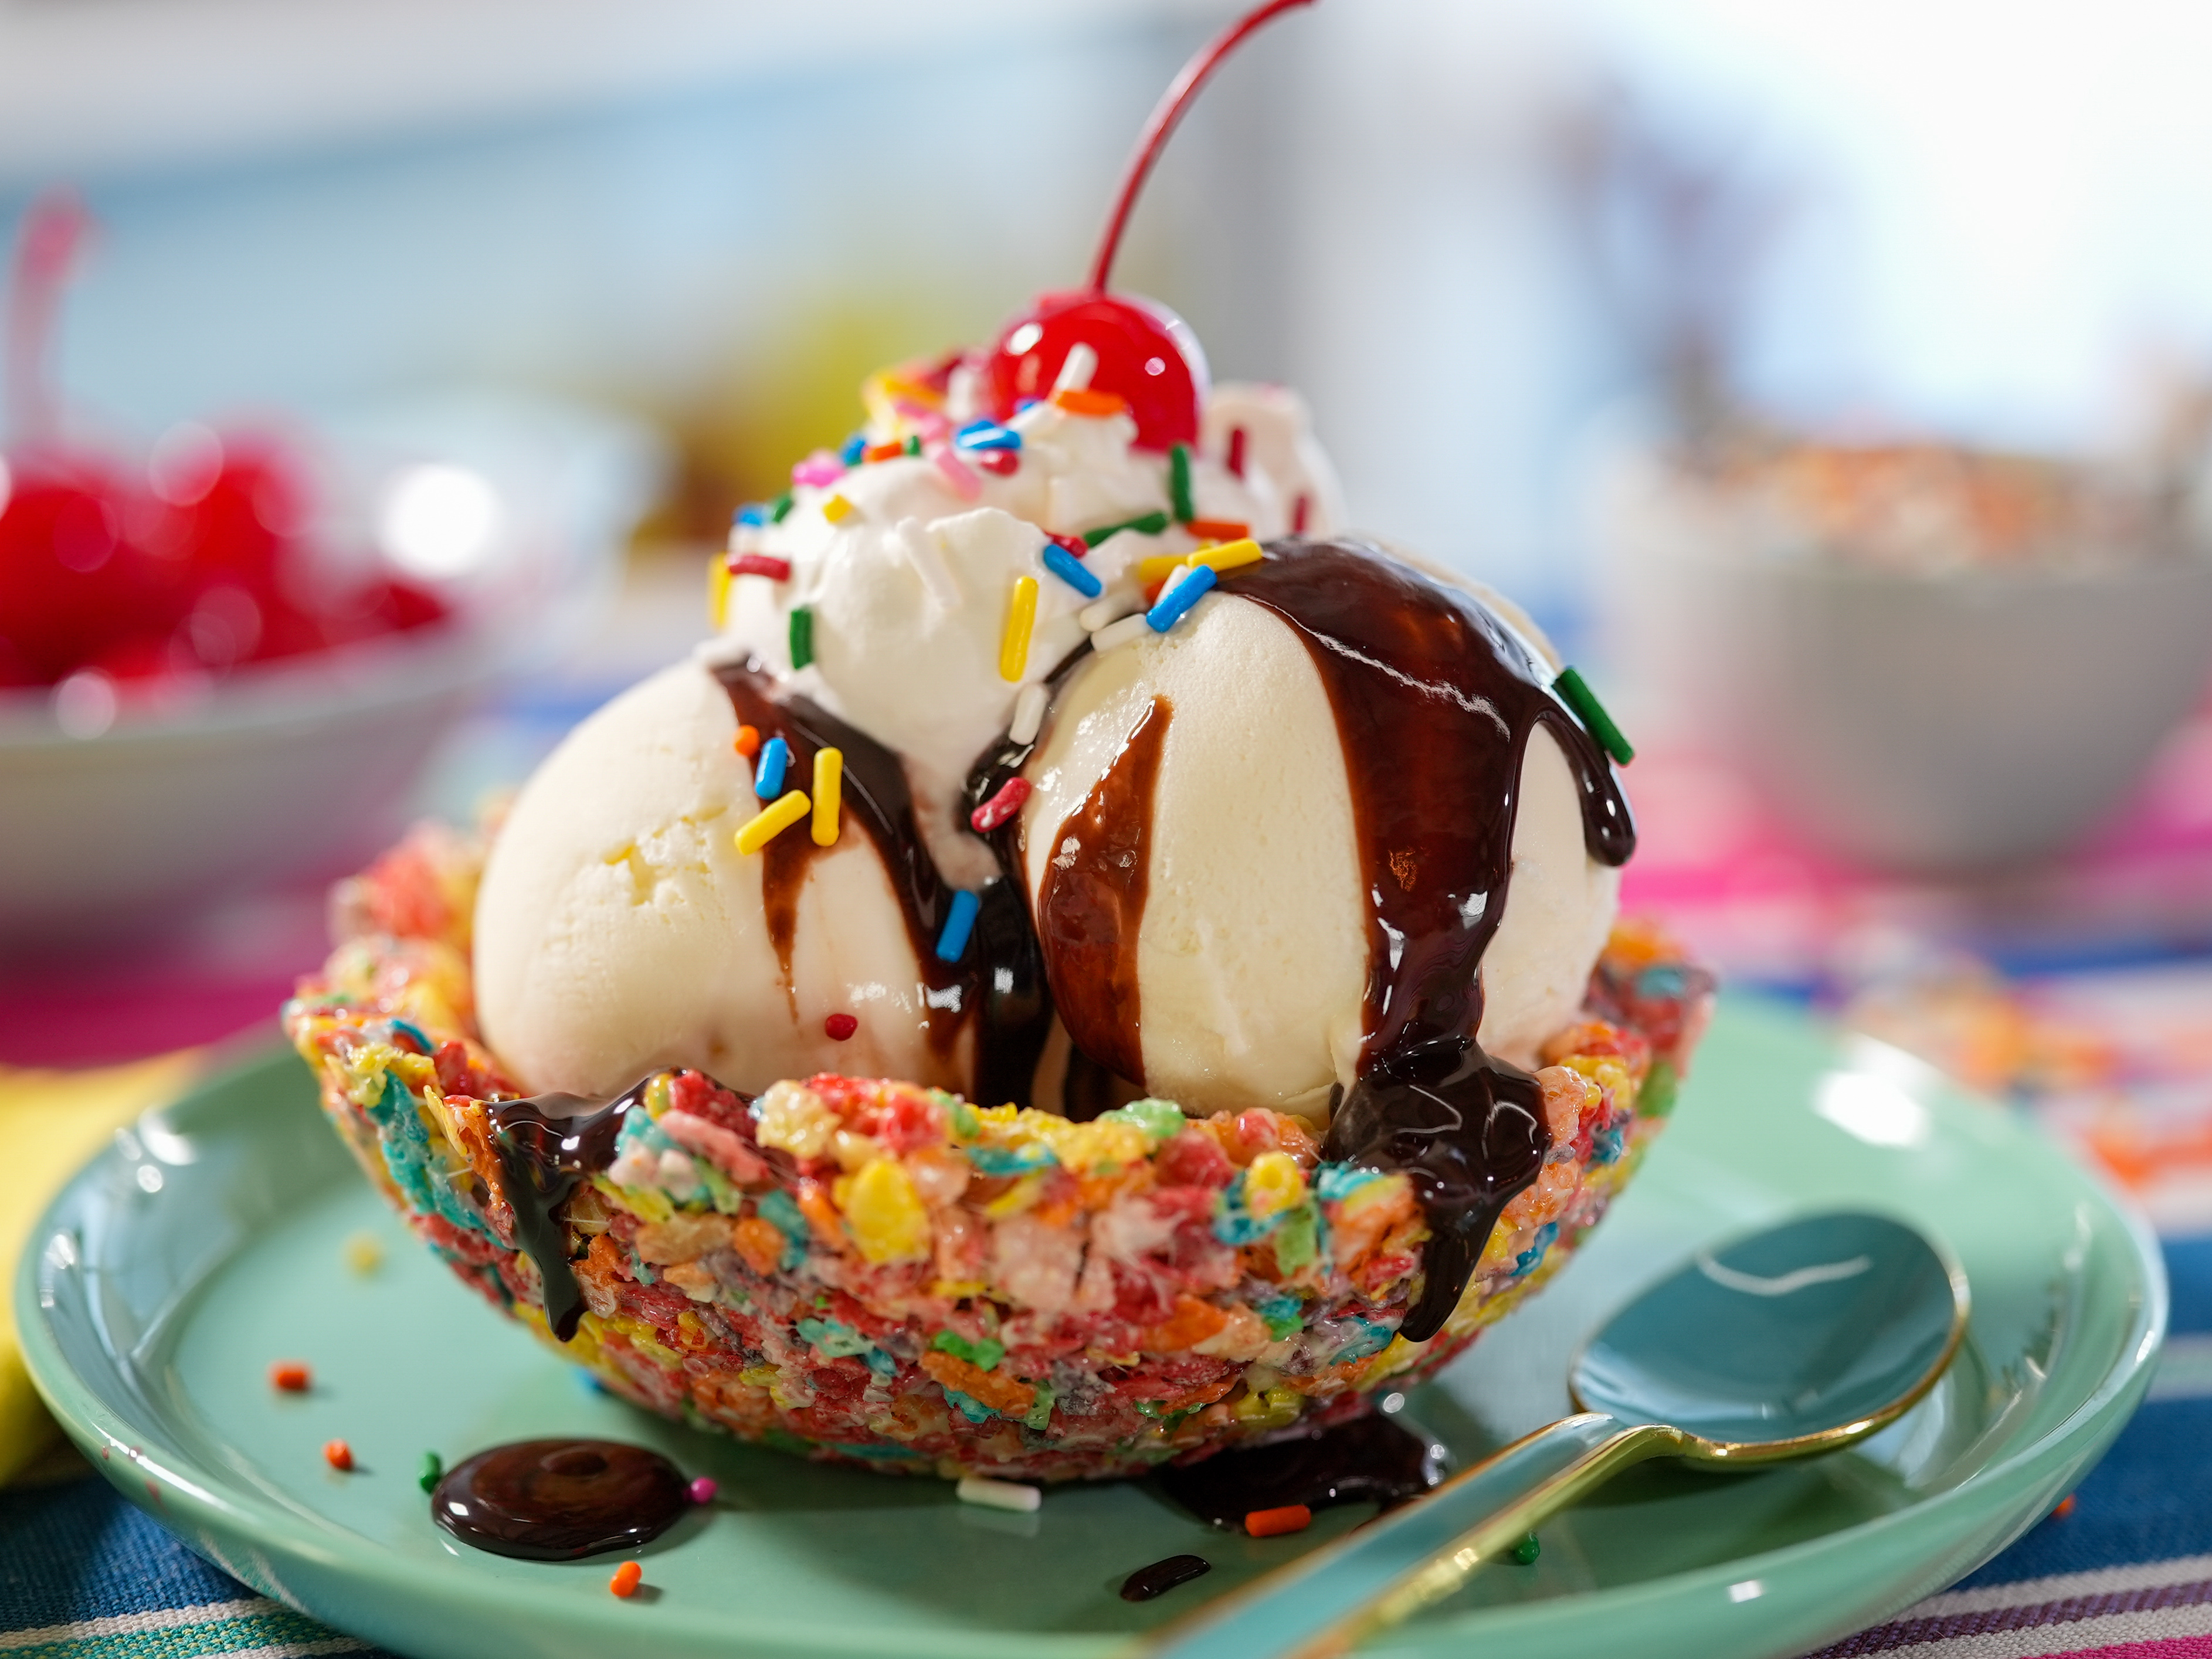 Edible Cereal Treat Bowls for Ice Cream Sundaes Recipe | Food Network